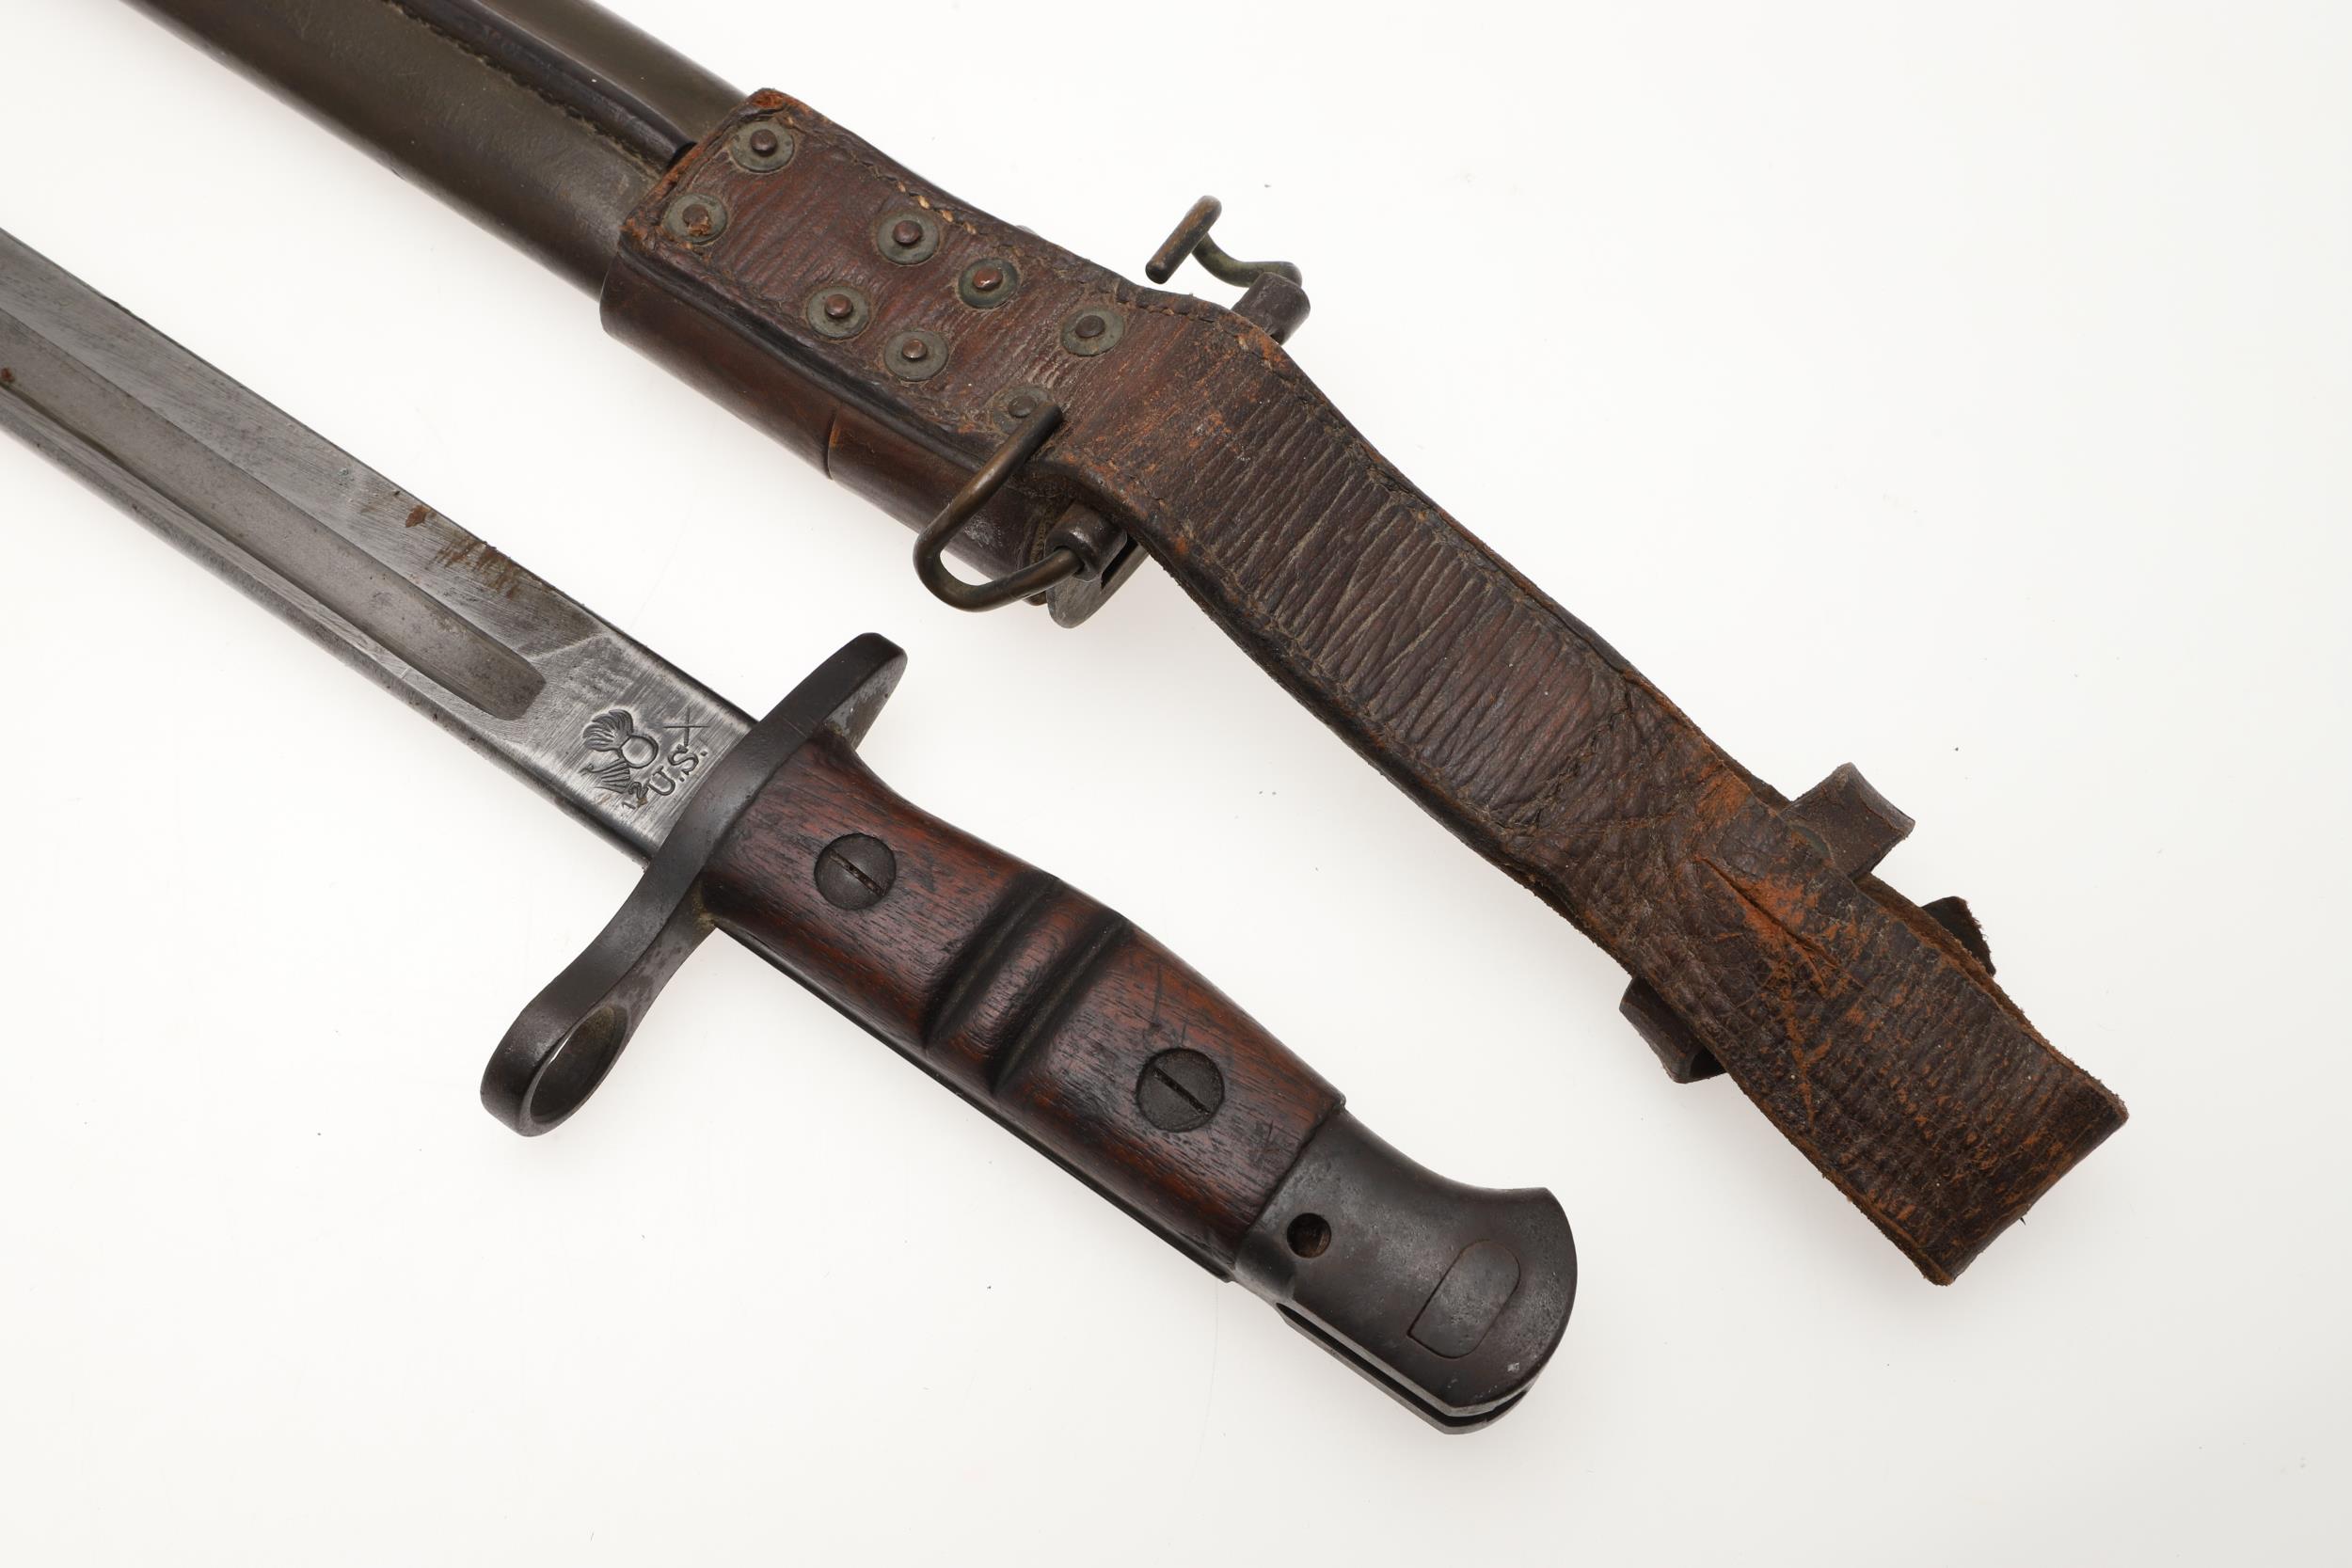 AN AMERICAN REMINGTON FIRST WORLD WAR 1917 PATTERN BAYONET AND SCABBARD. - Image 6 of 8